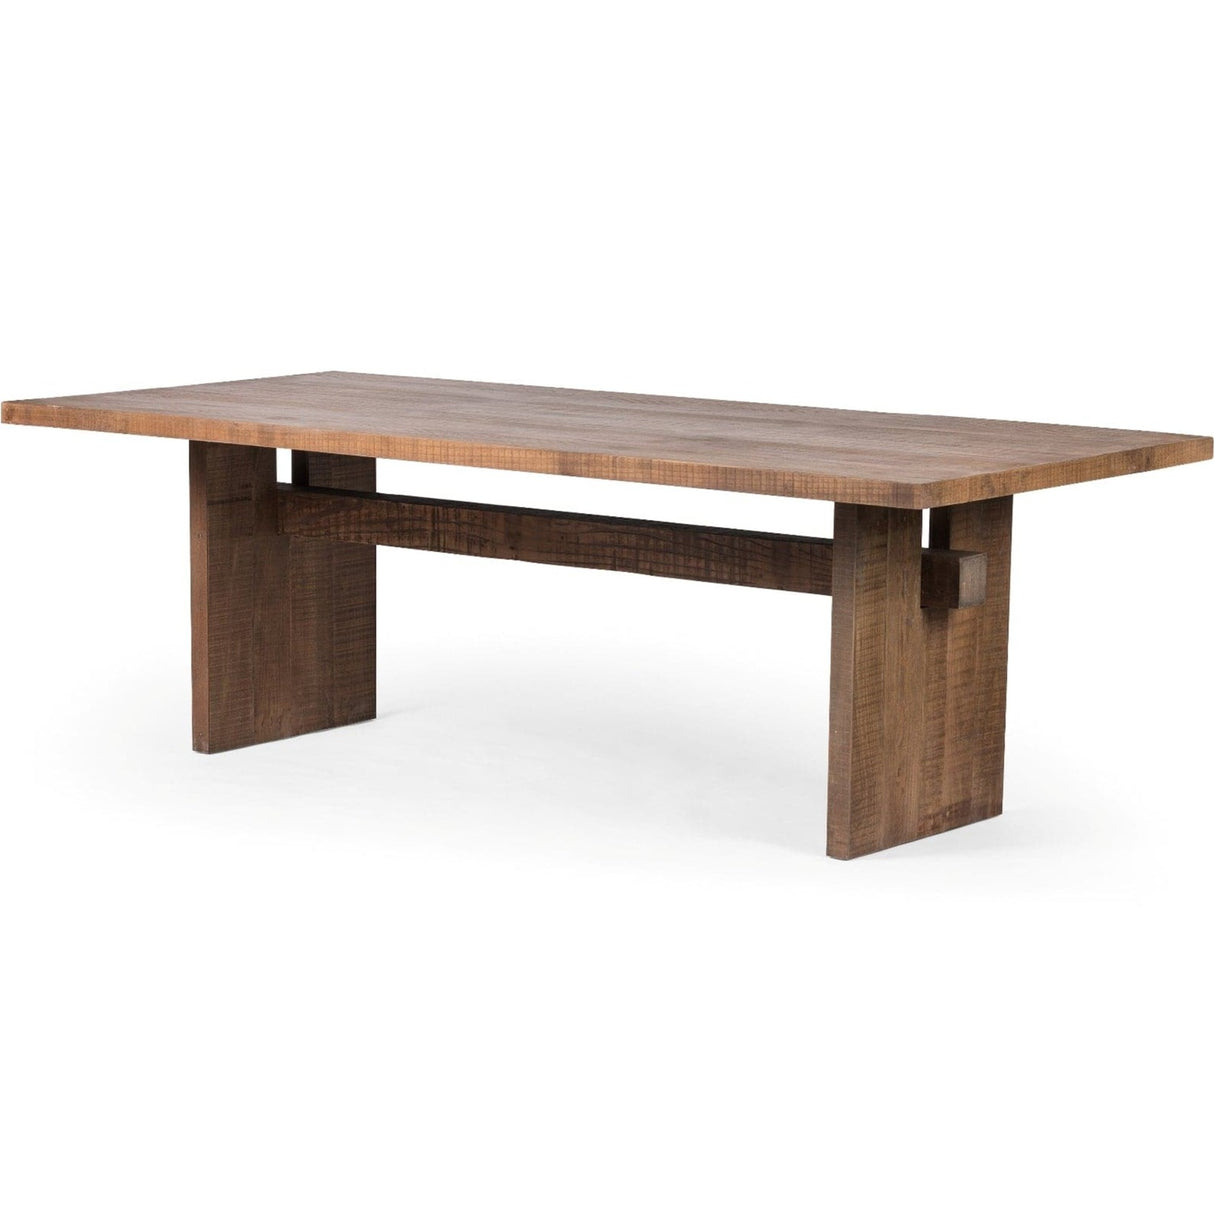 Four Hands Brandy Dining Table Wooden Dining Table four-hands-236070-001 801542090722